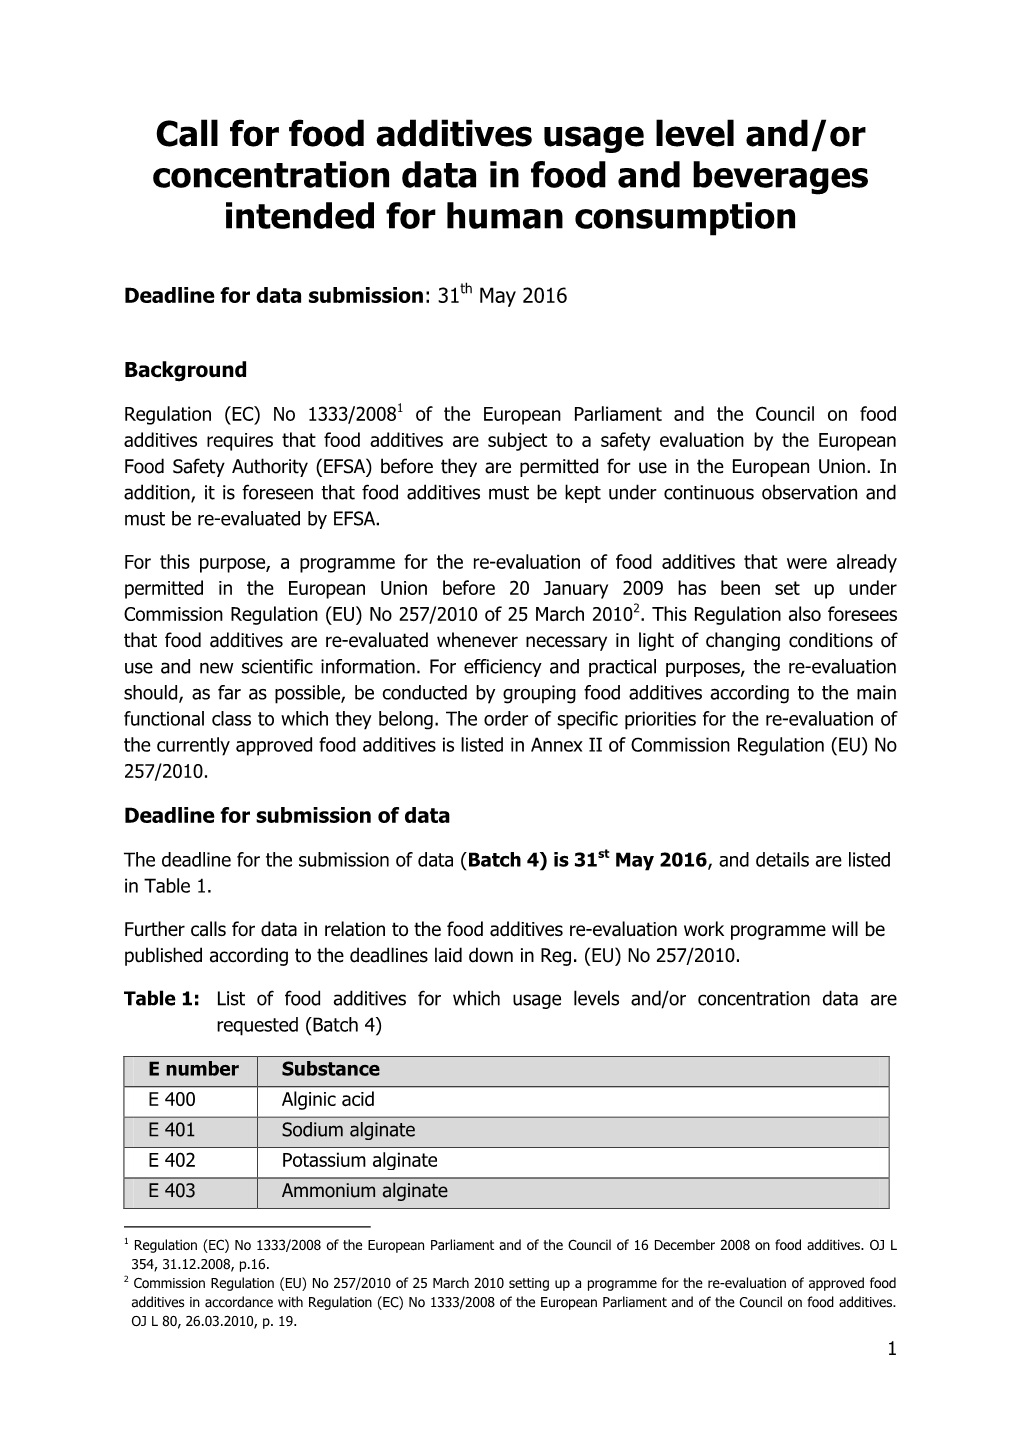 Call for Food Additives Usage Level And/Or Concentration Data in Food and Beverages Intended for Human Consumption